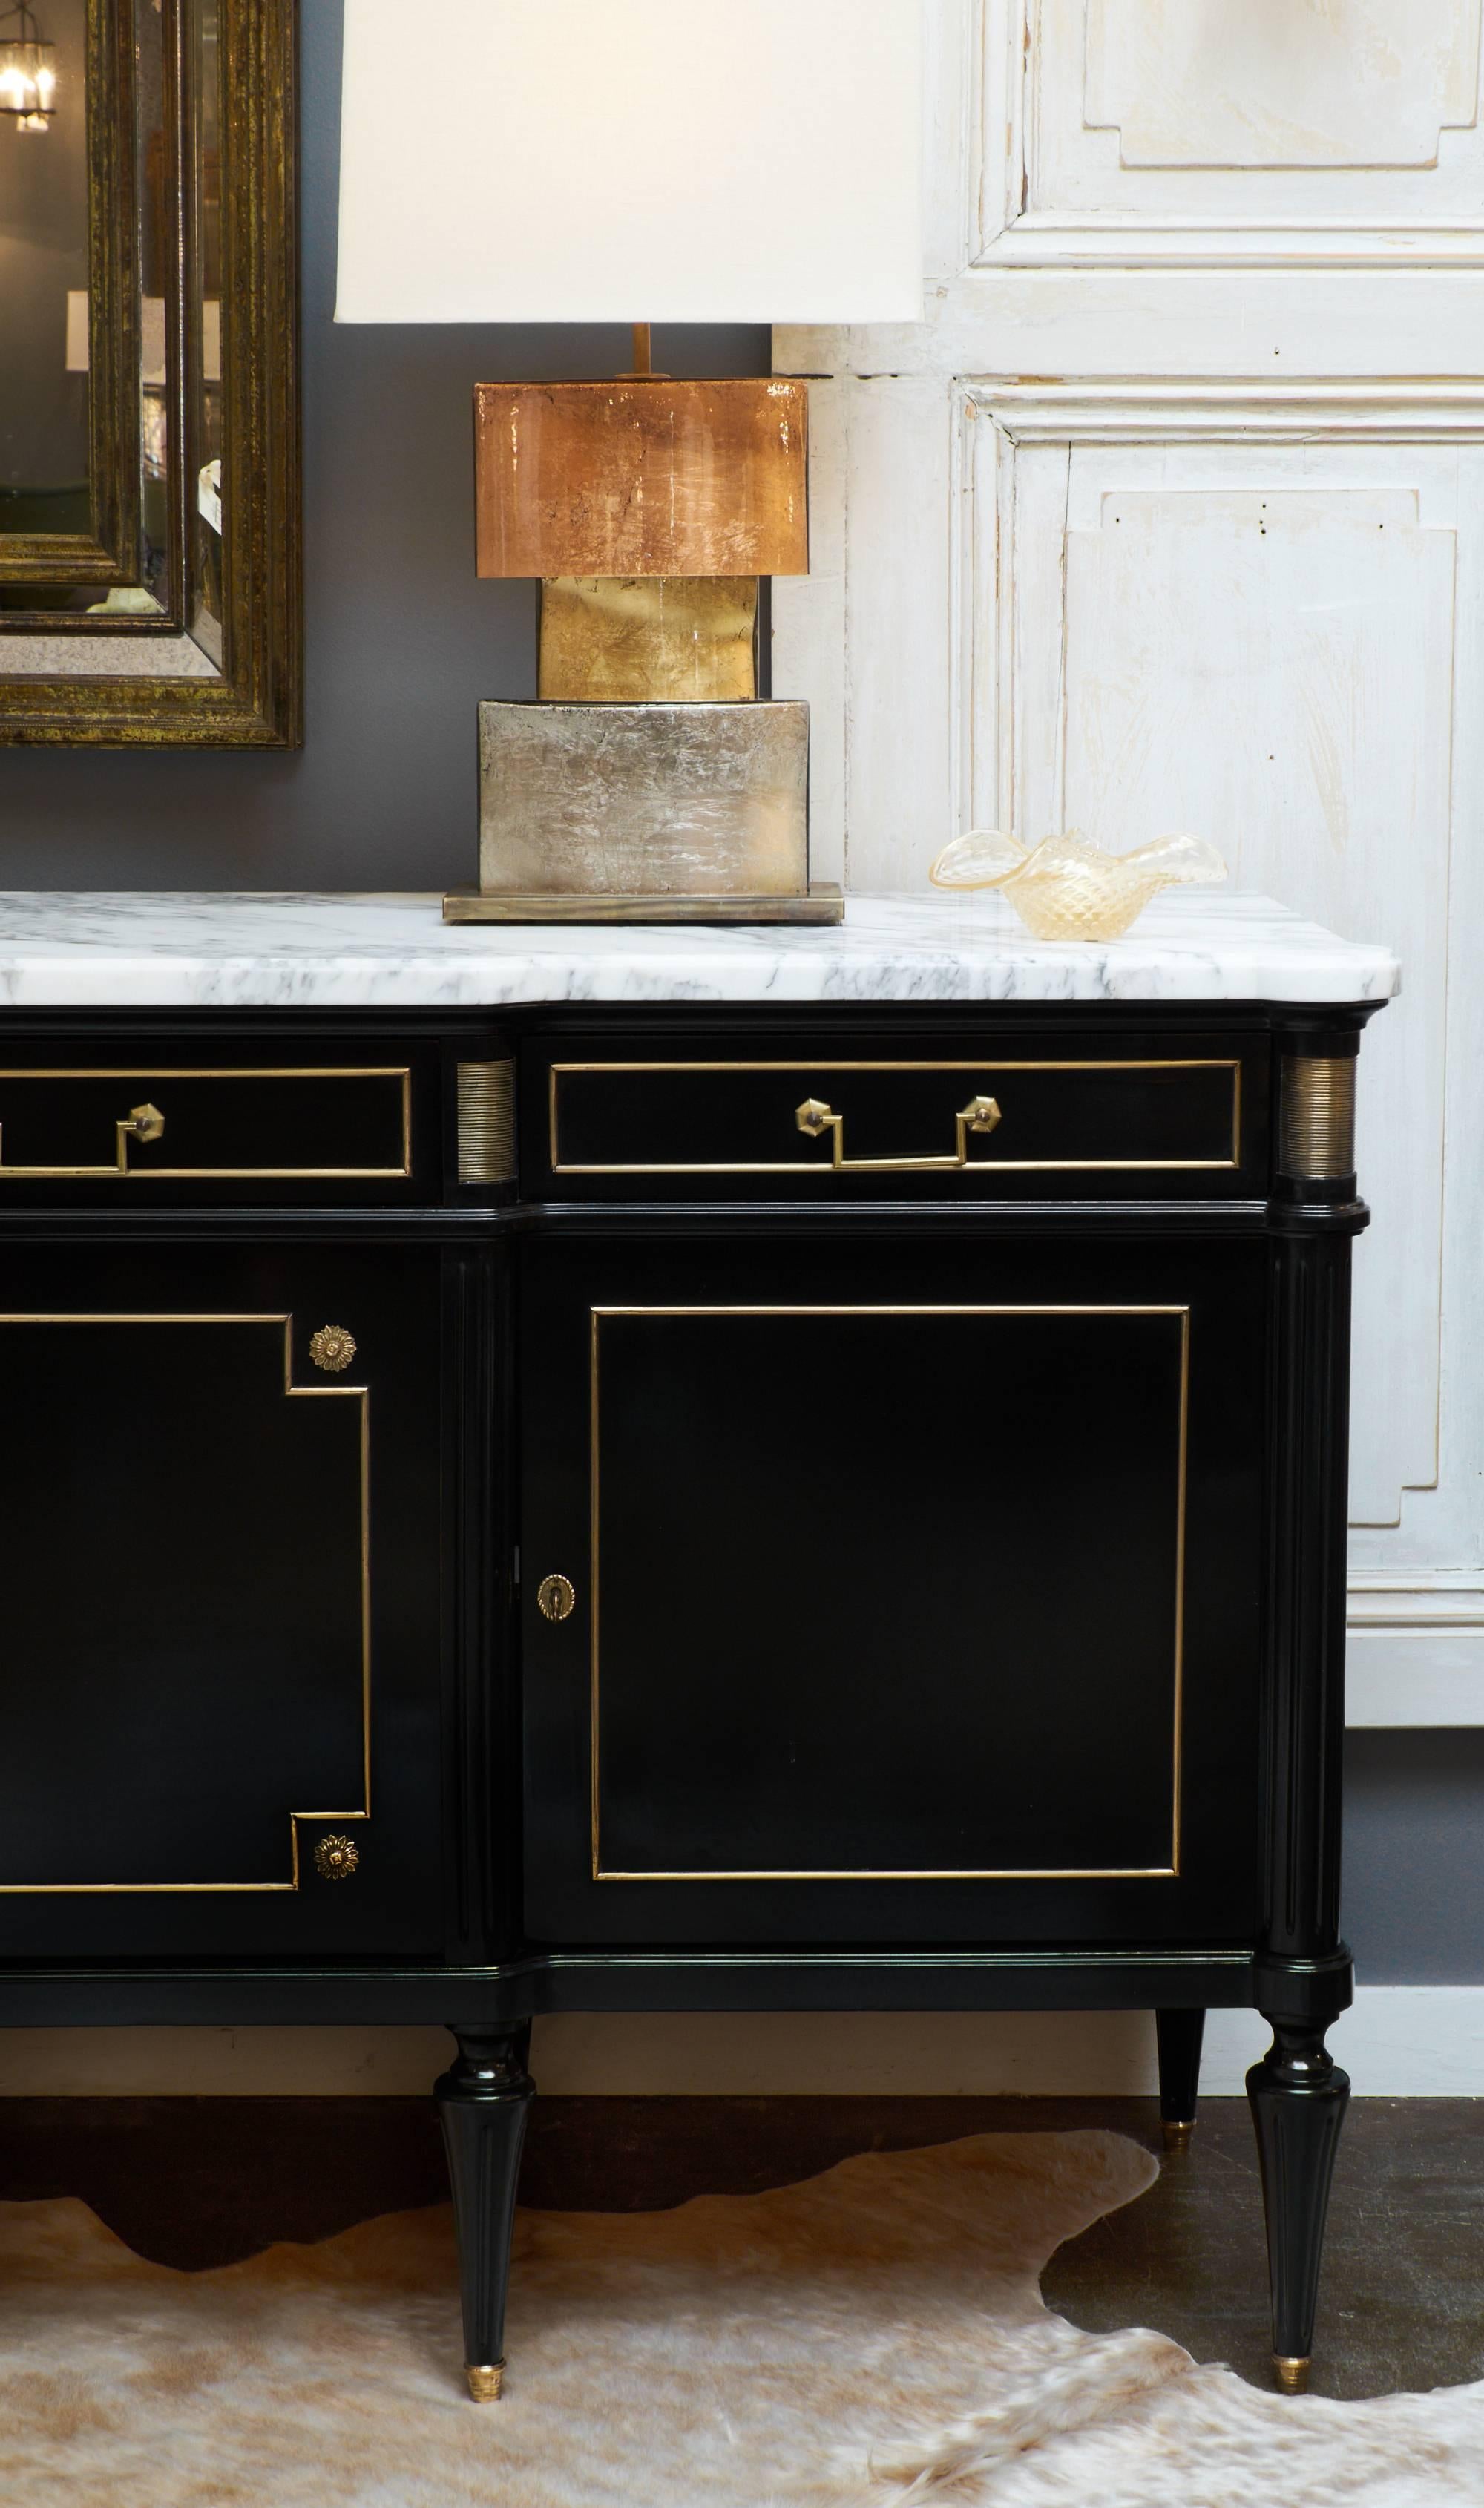 French antique Louis XVI style enfilade of ebonized mahogany with a flawless French polish finish. White Carrara marble top with beautiful gray veining. We couldn't resist the exquisite details, such as the brass trim, cast bronze details , and